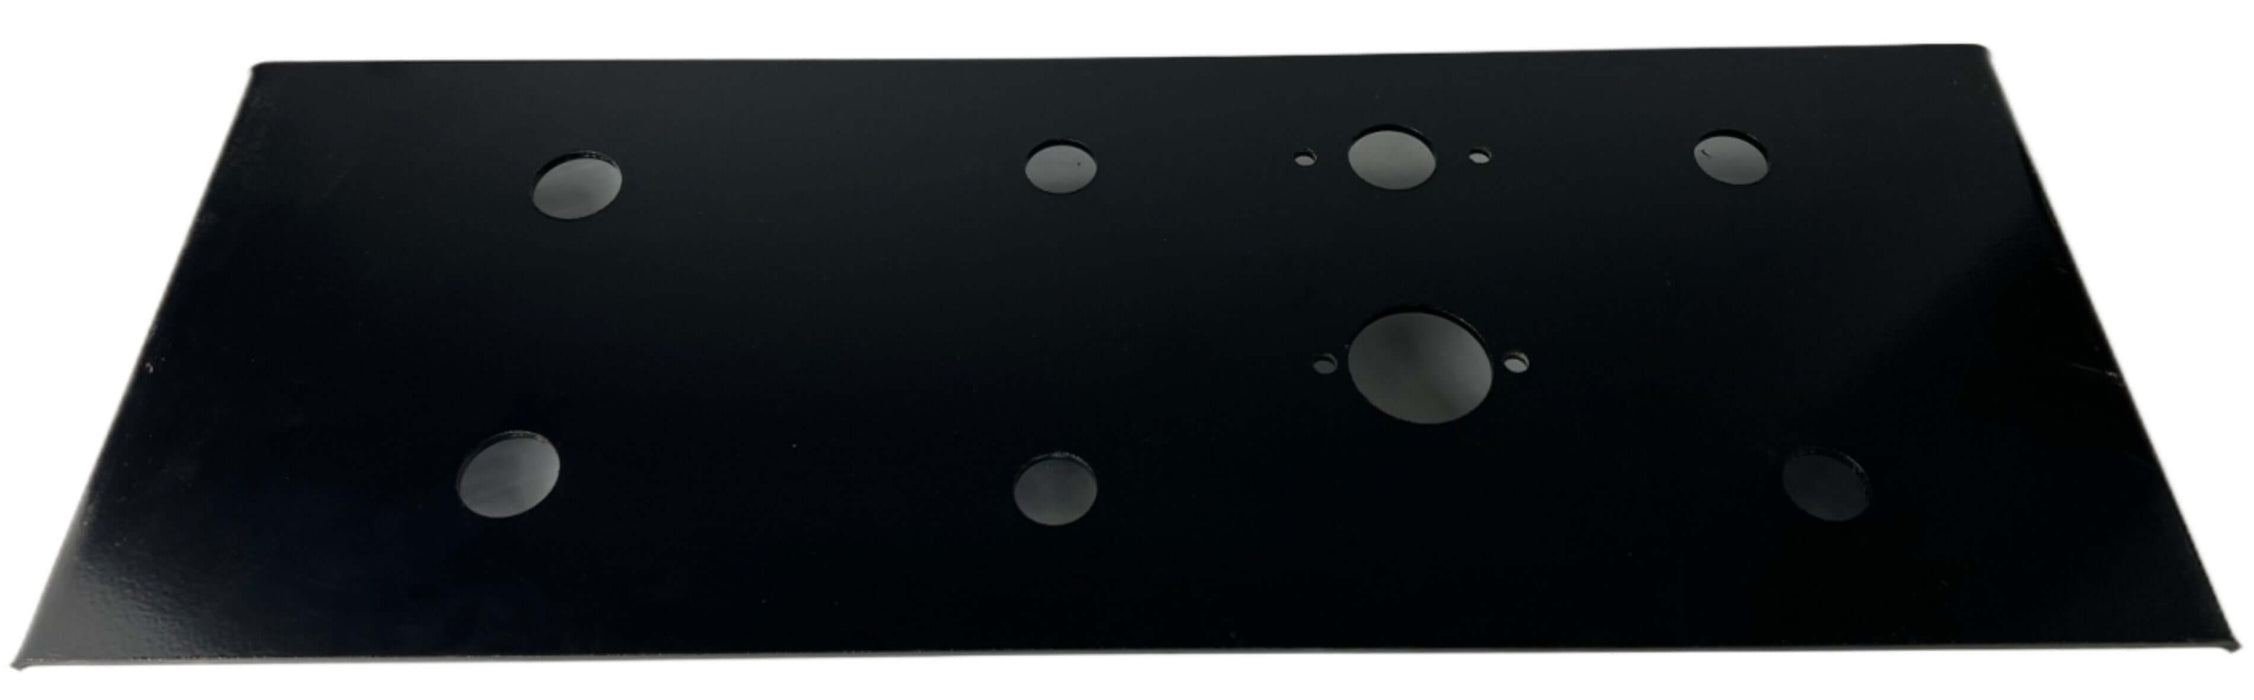 A manifold plate for running airlines between semi trucks and trailers with headache racks with 8 holes for connection passing through a black rectangular metal plate